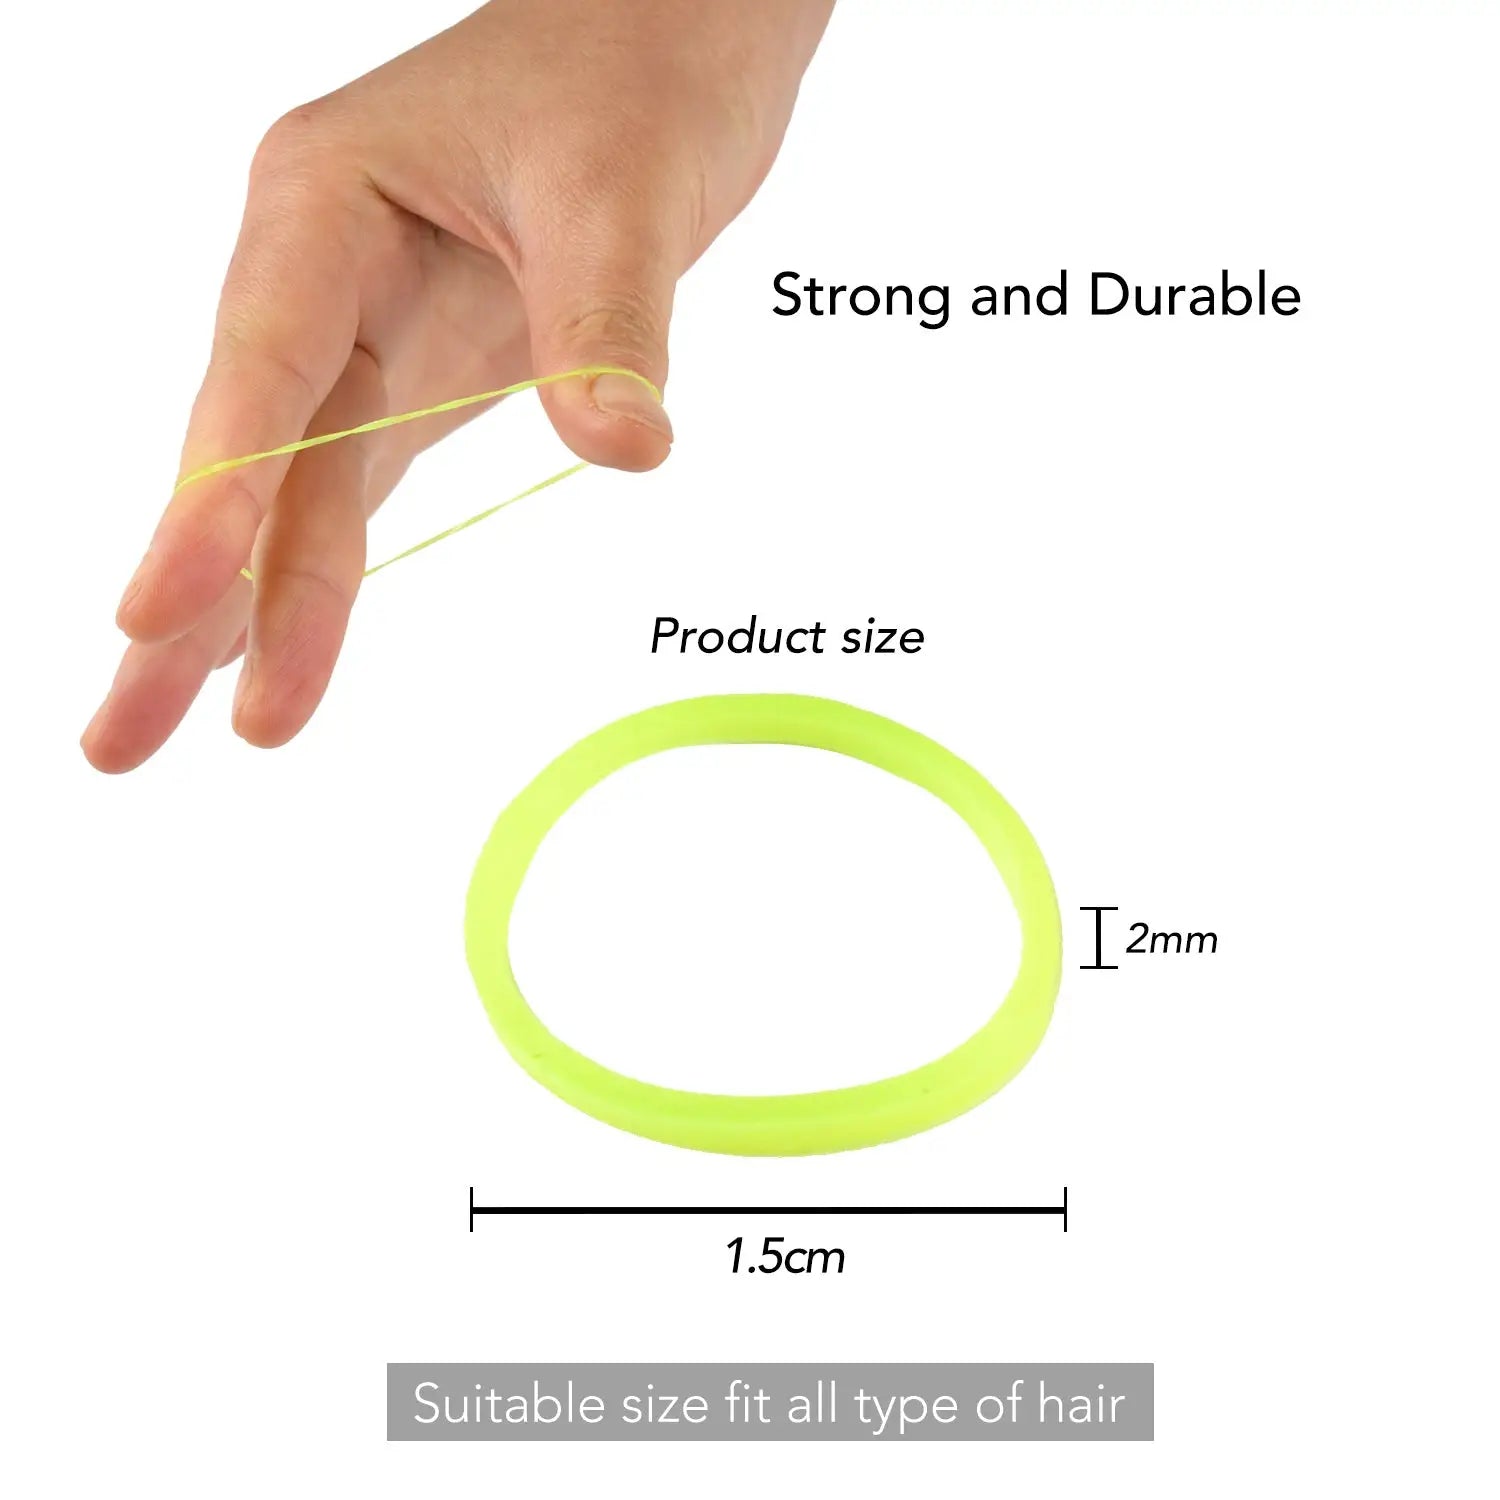 Extra Strong Mini Rubber Bands - Versatile Hair Styling Options: Yellow plastic ring held by hand